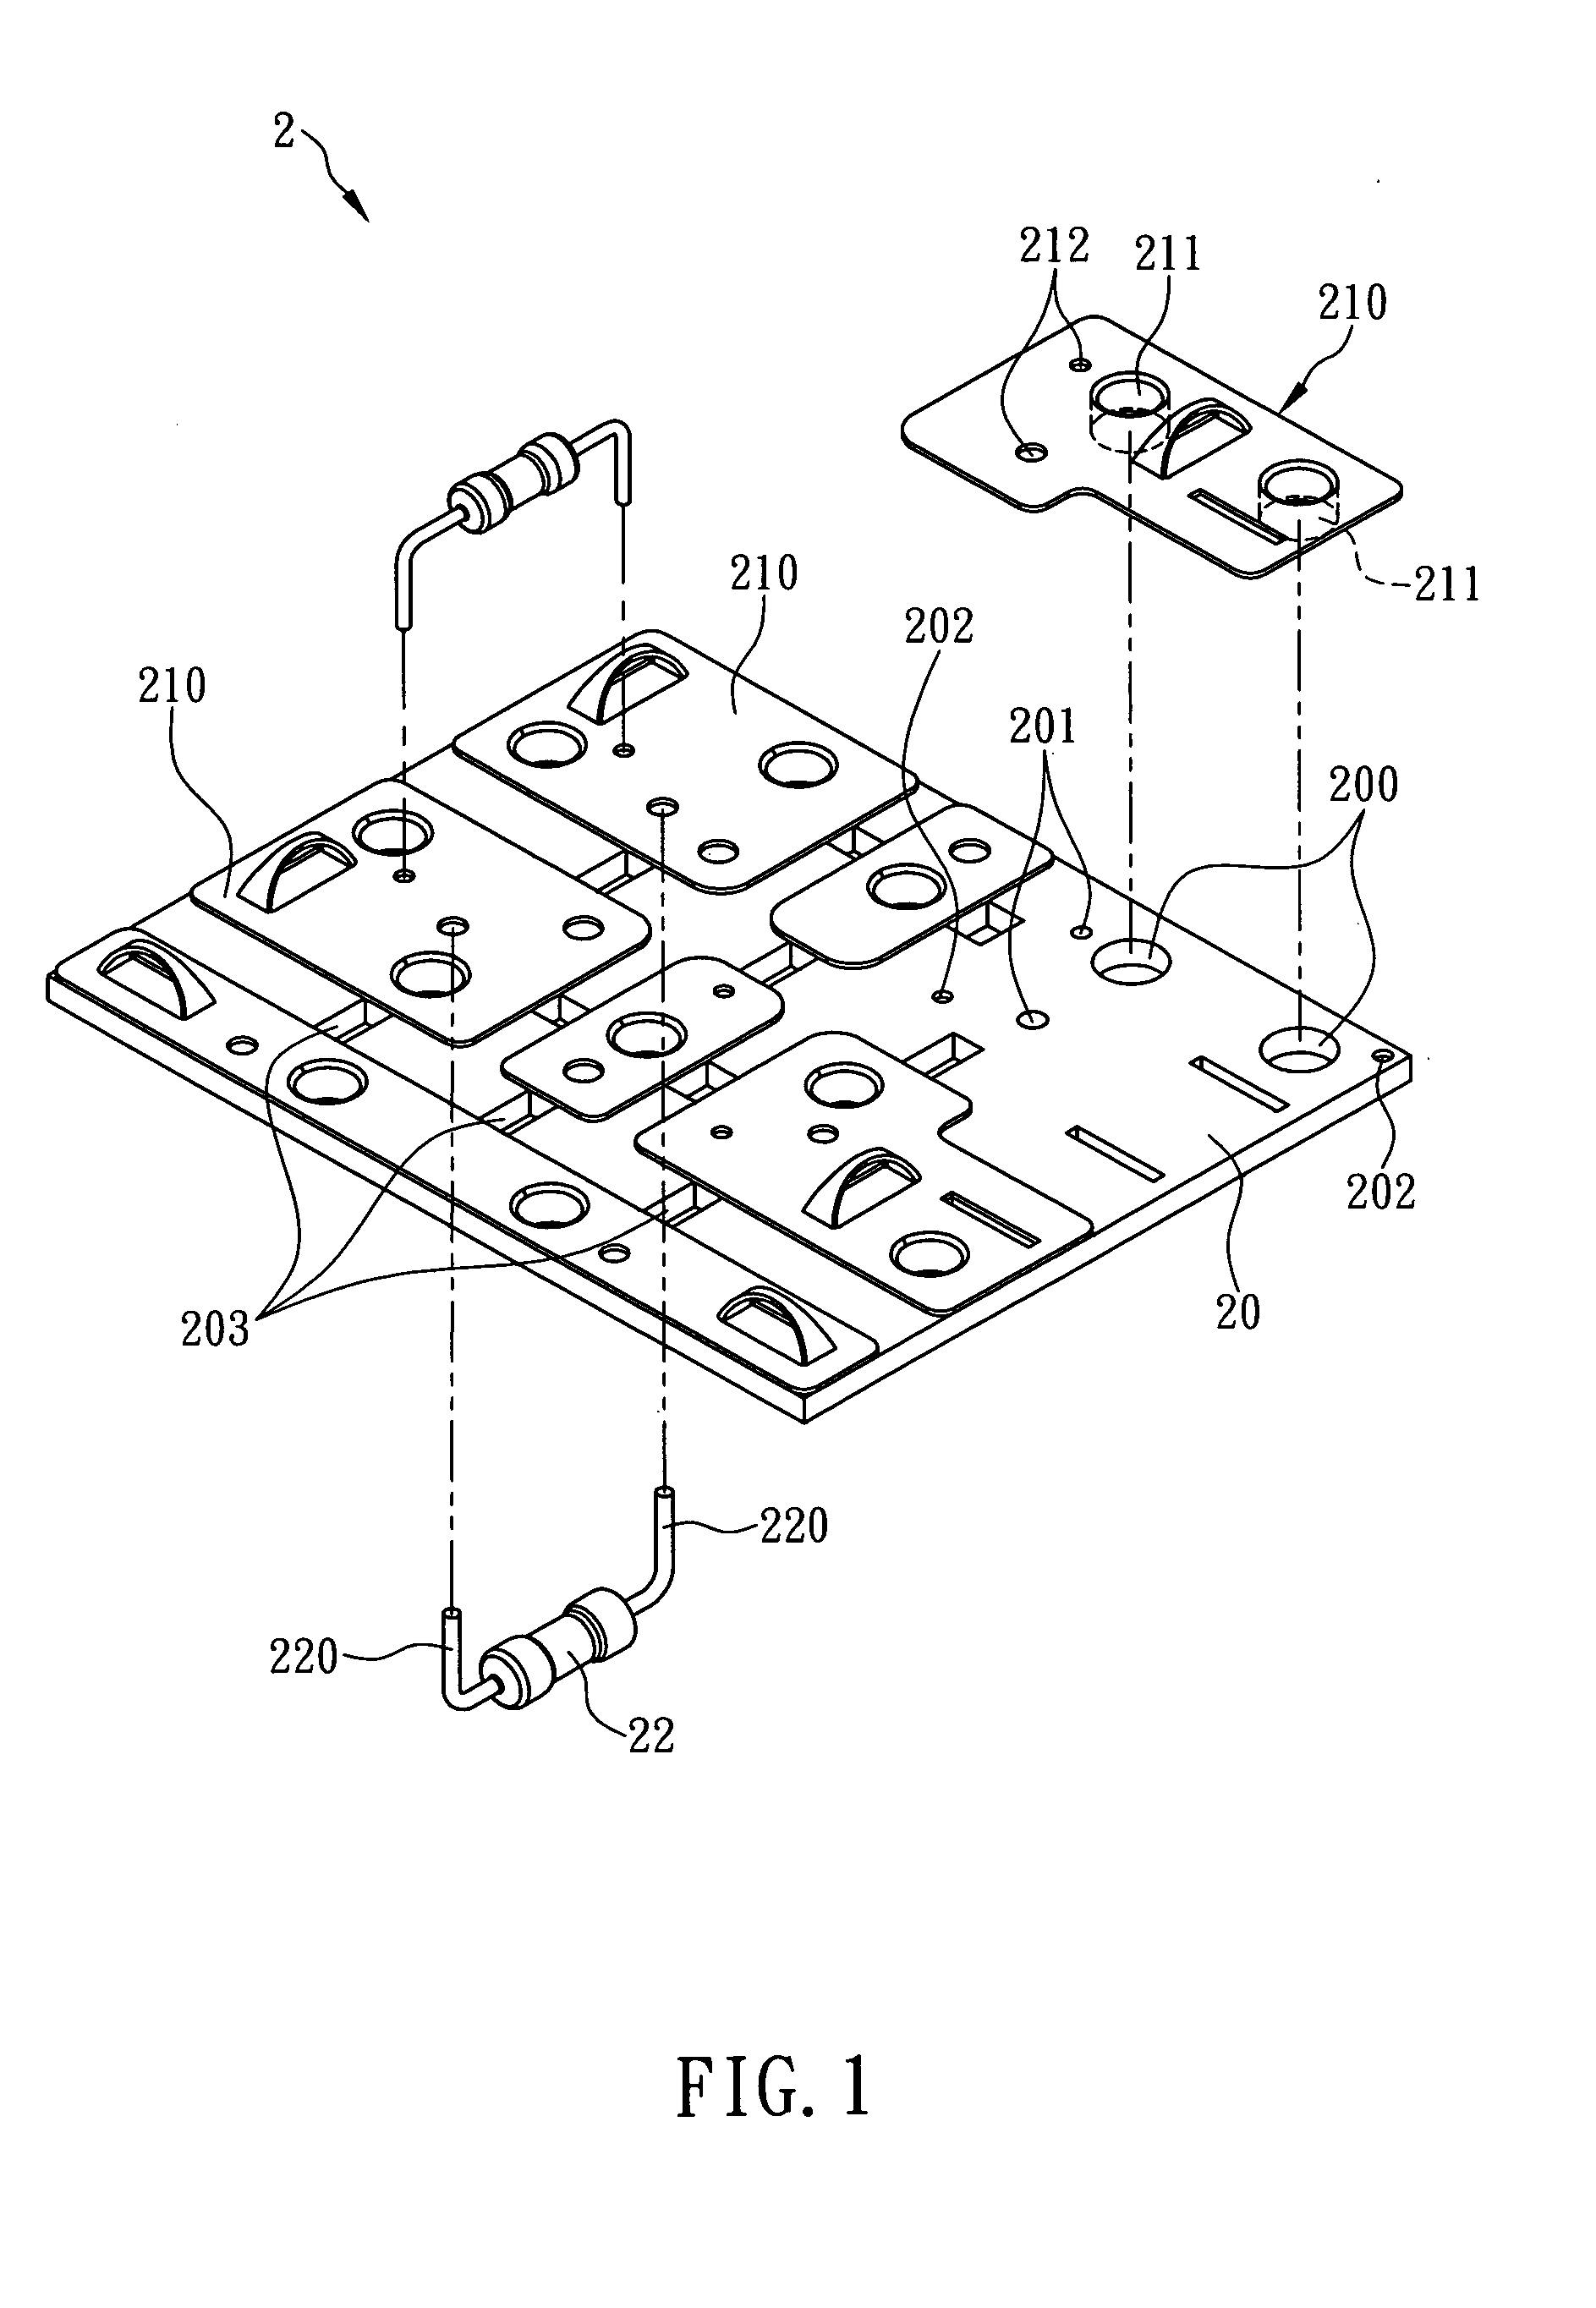 Circuit board capable of loading high electrical current